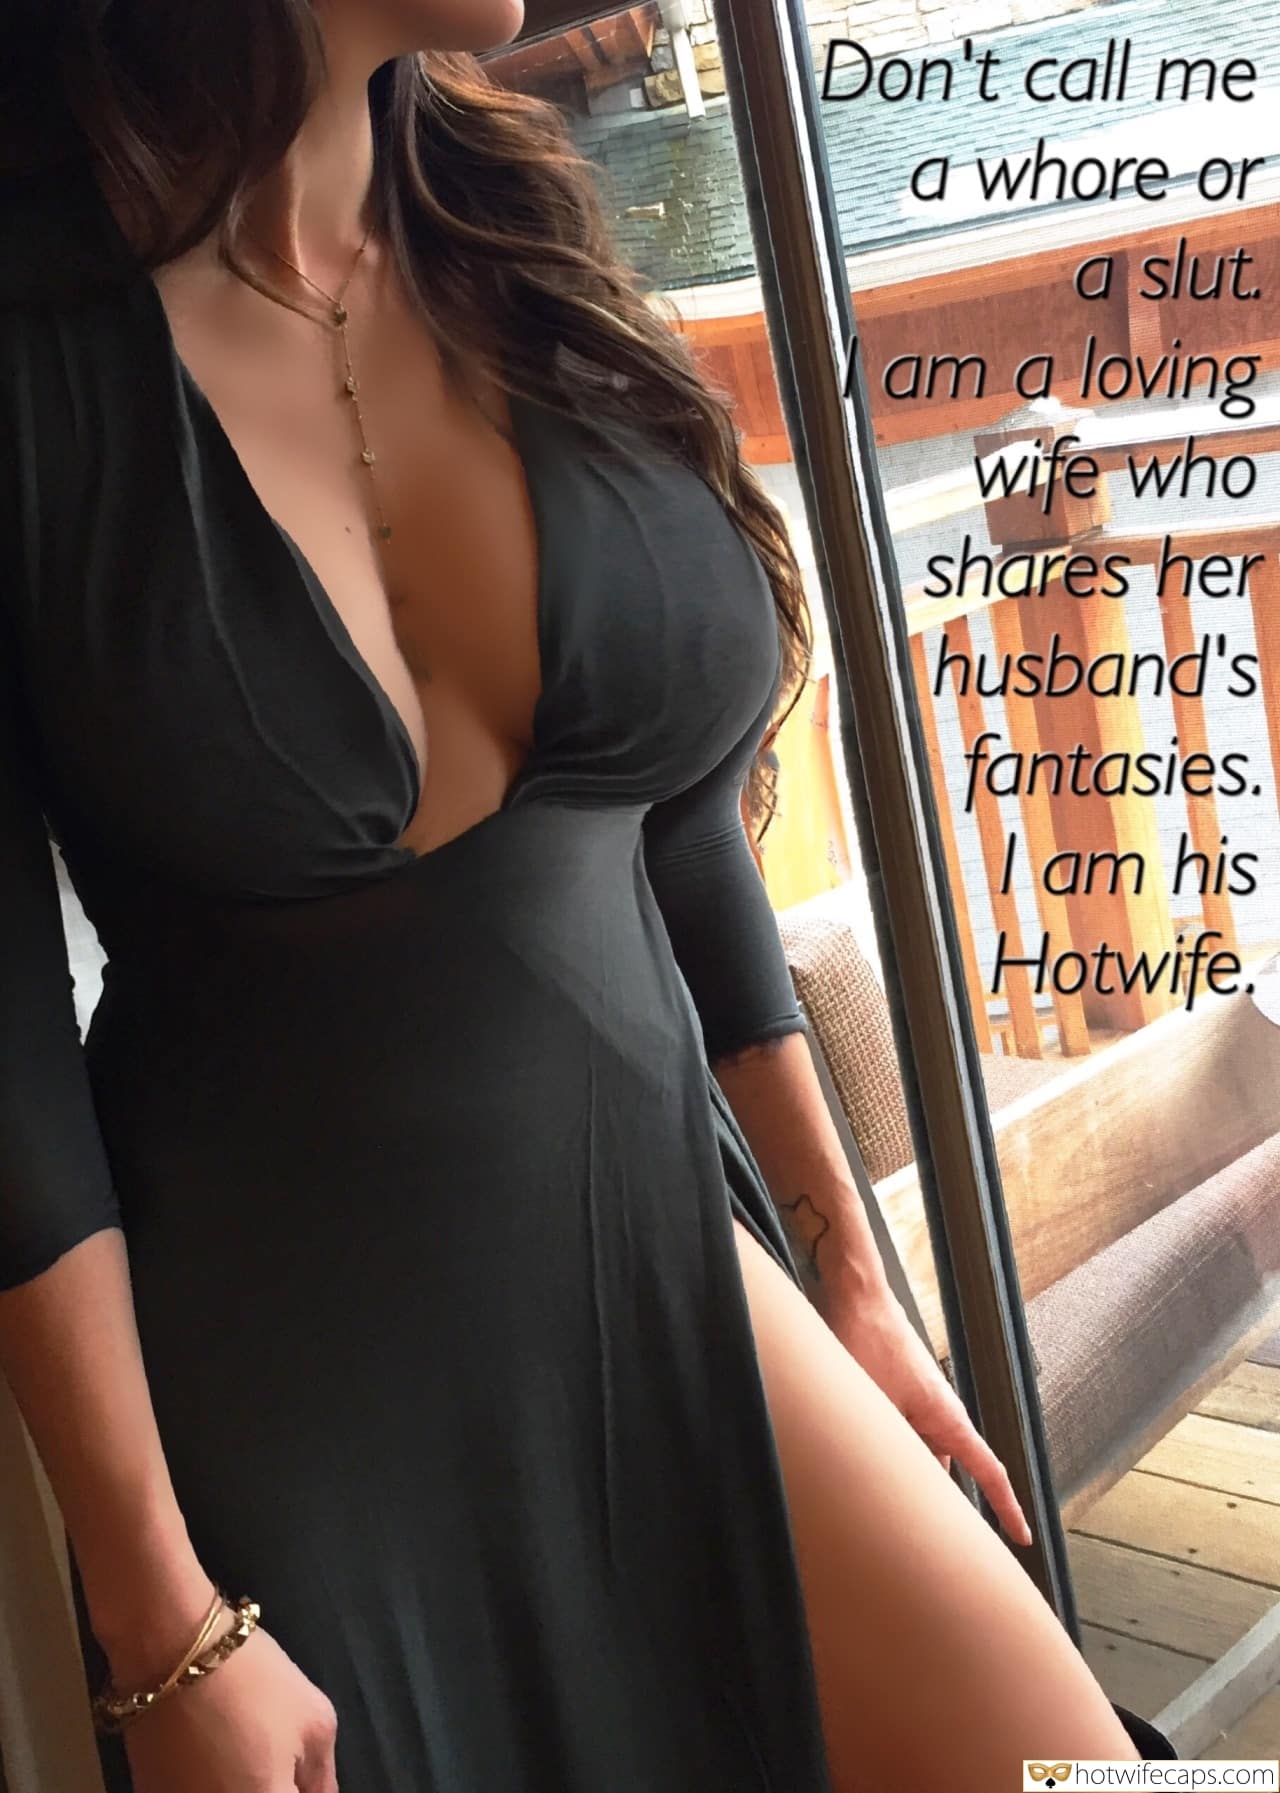 Sexy Memes  hotwife caption: Don’t call me a whore or a slut. am a loving wife who shares her husband’s fantasies. | am his Hotwife, ir hotwife Curvaceous Brunette Poses in Black Dress by the Window